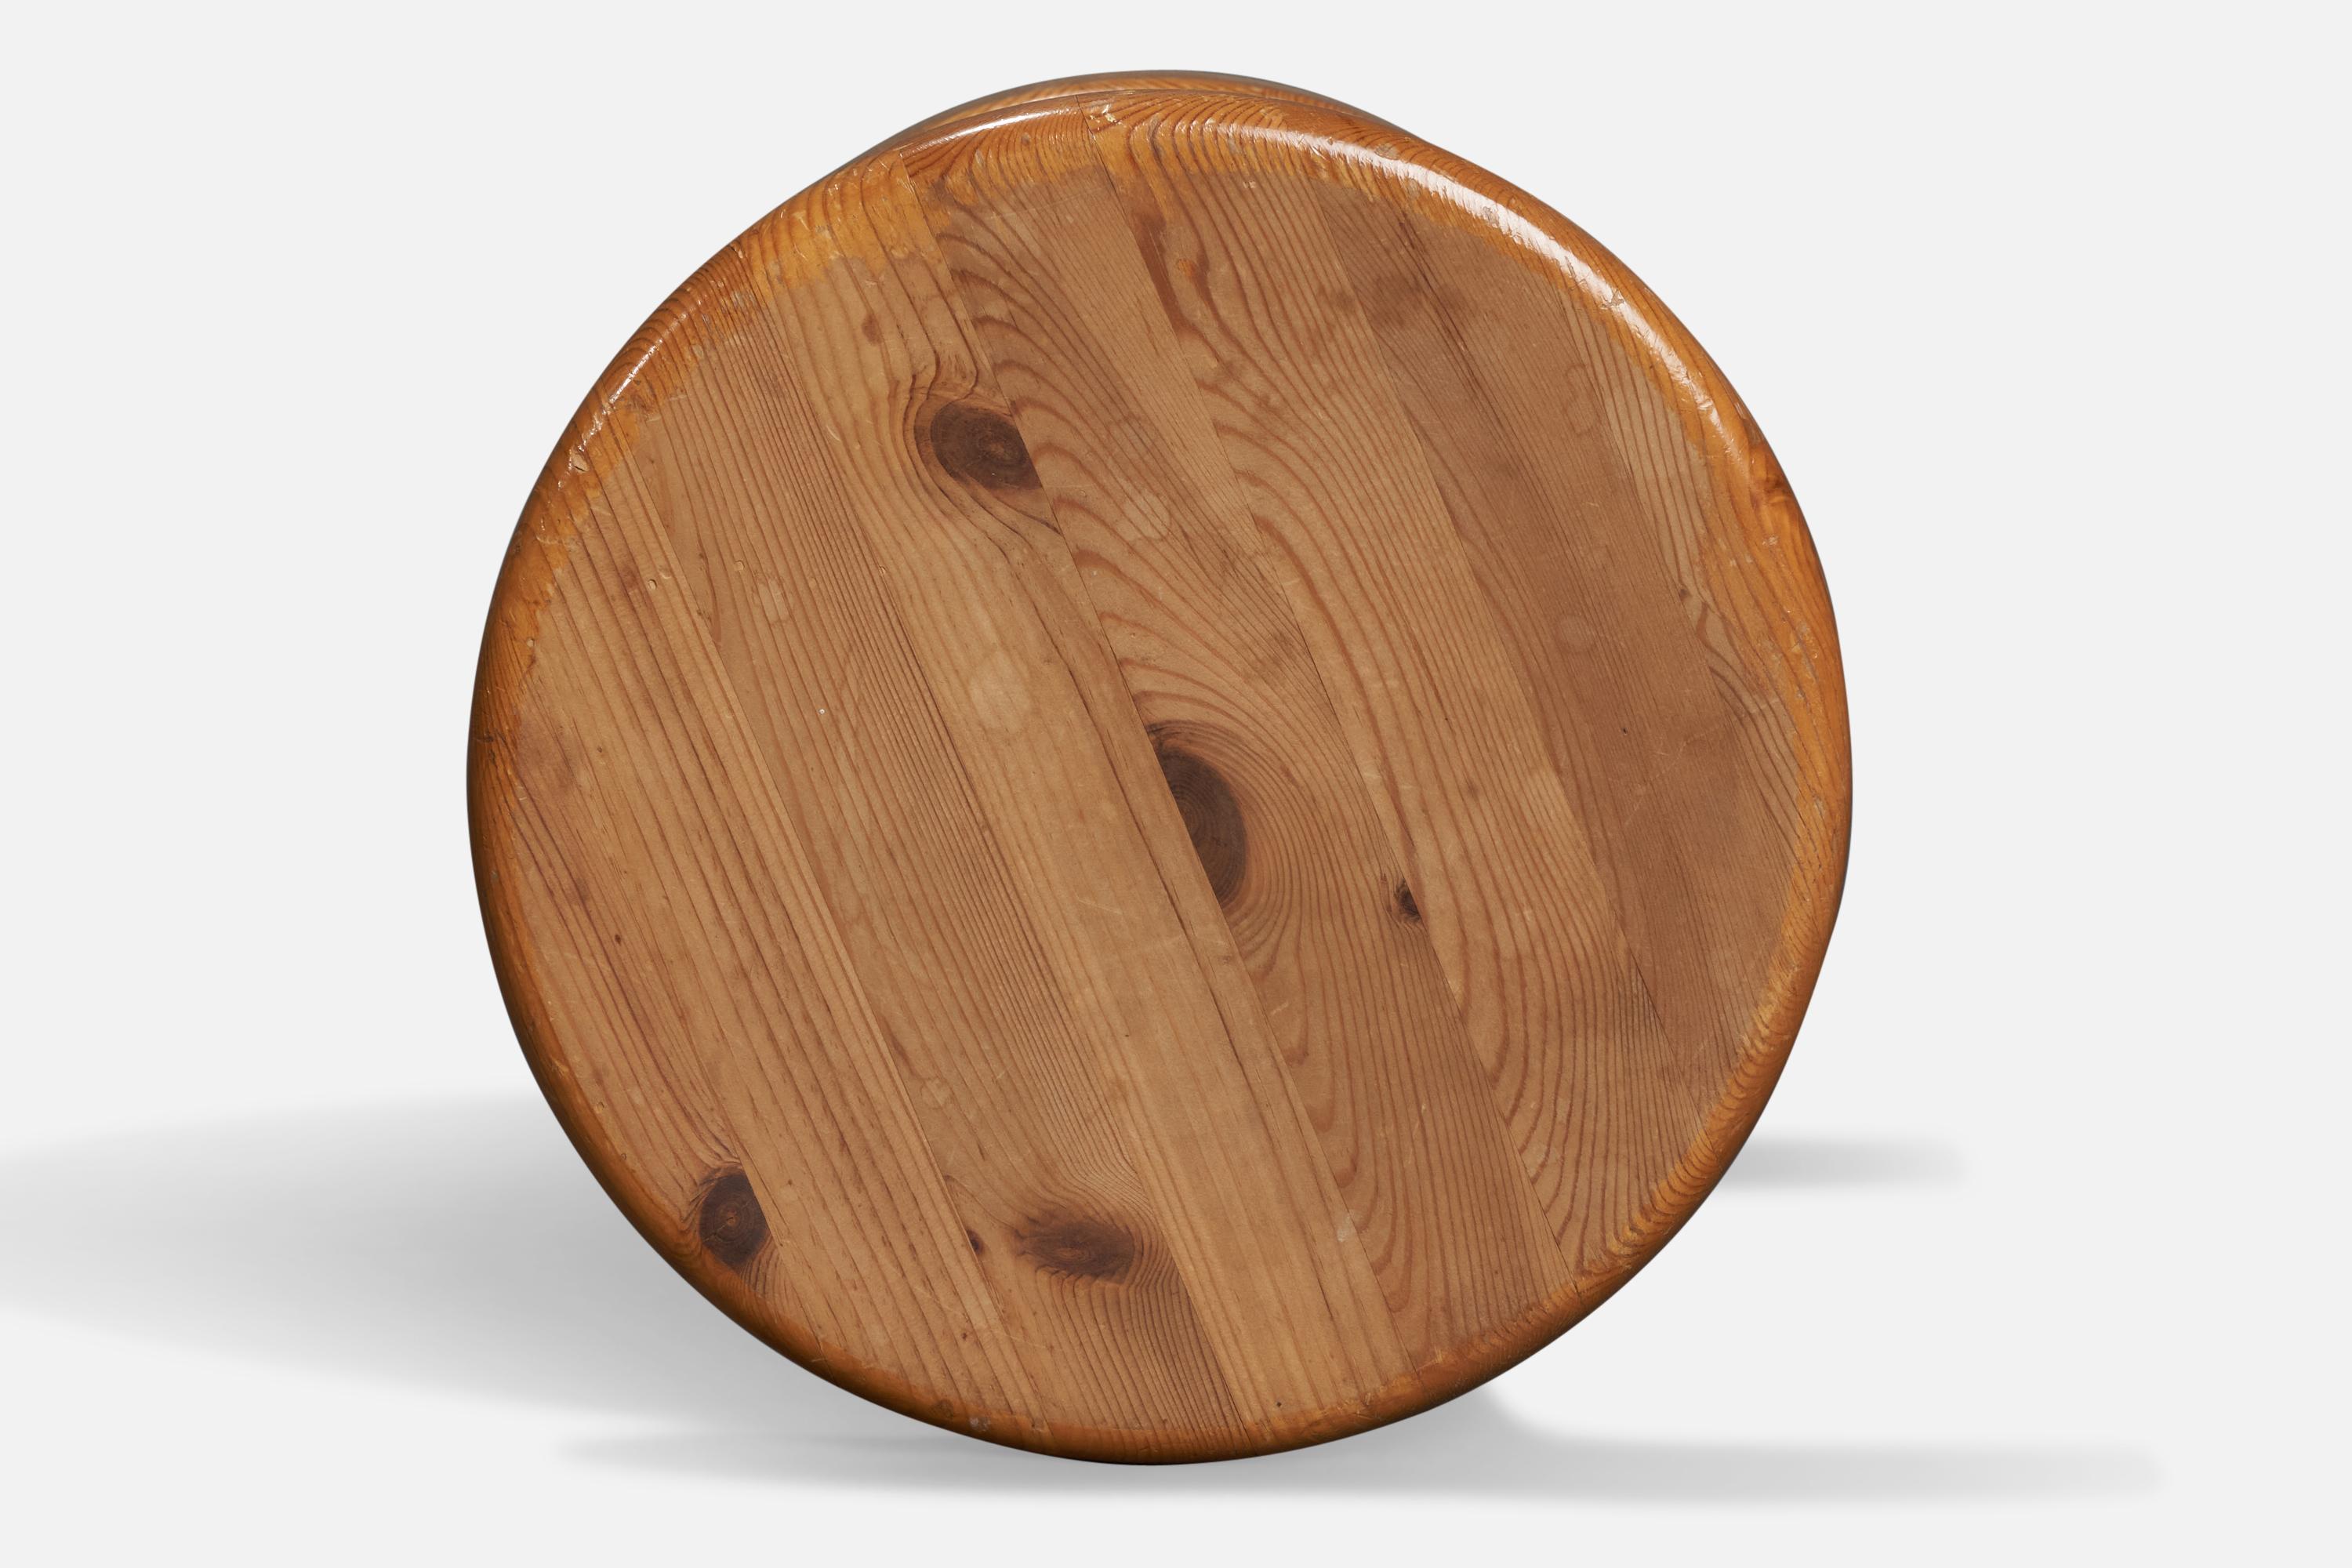 A pine stool designed and produced in Sweden, 1970s.